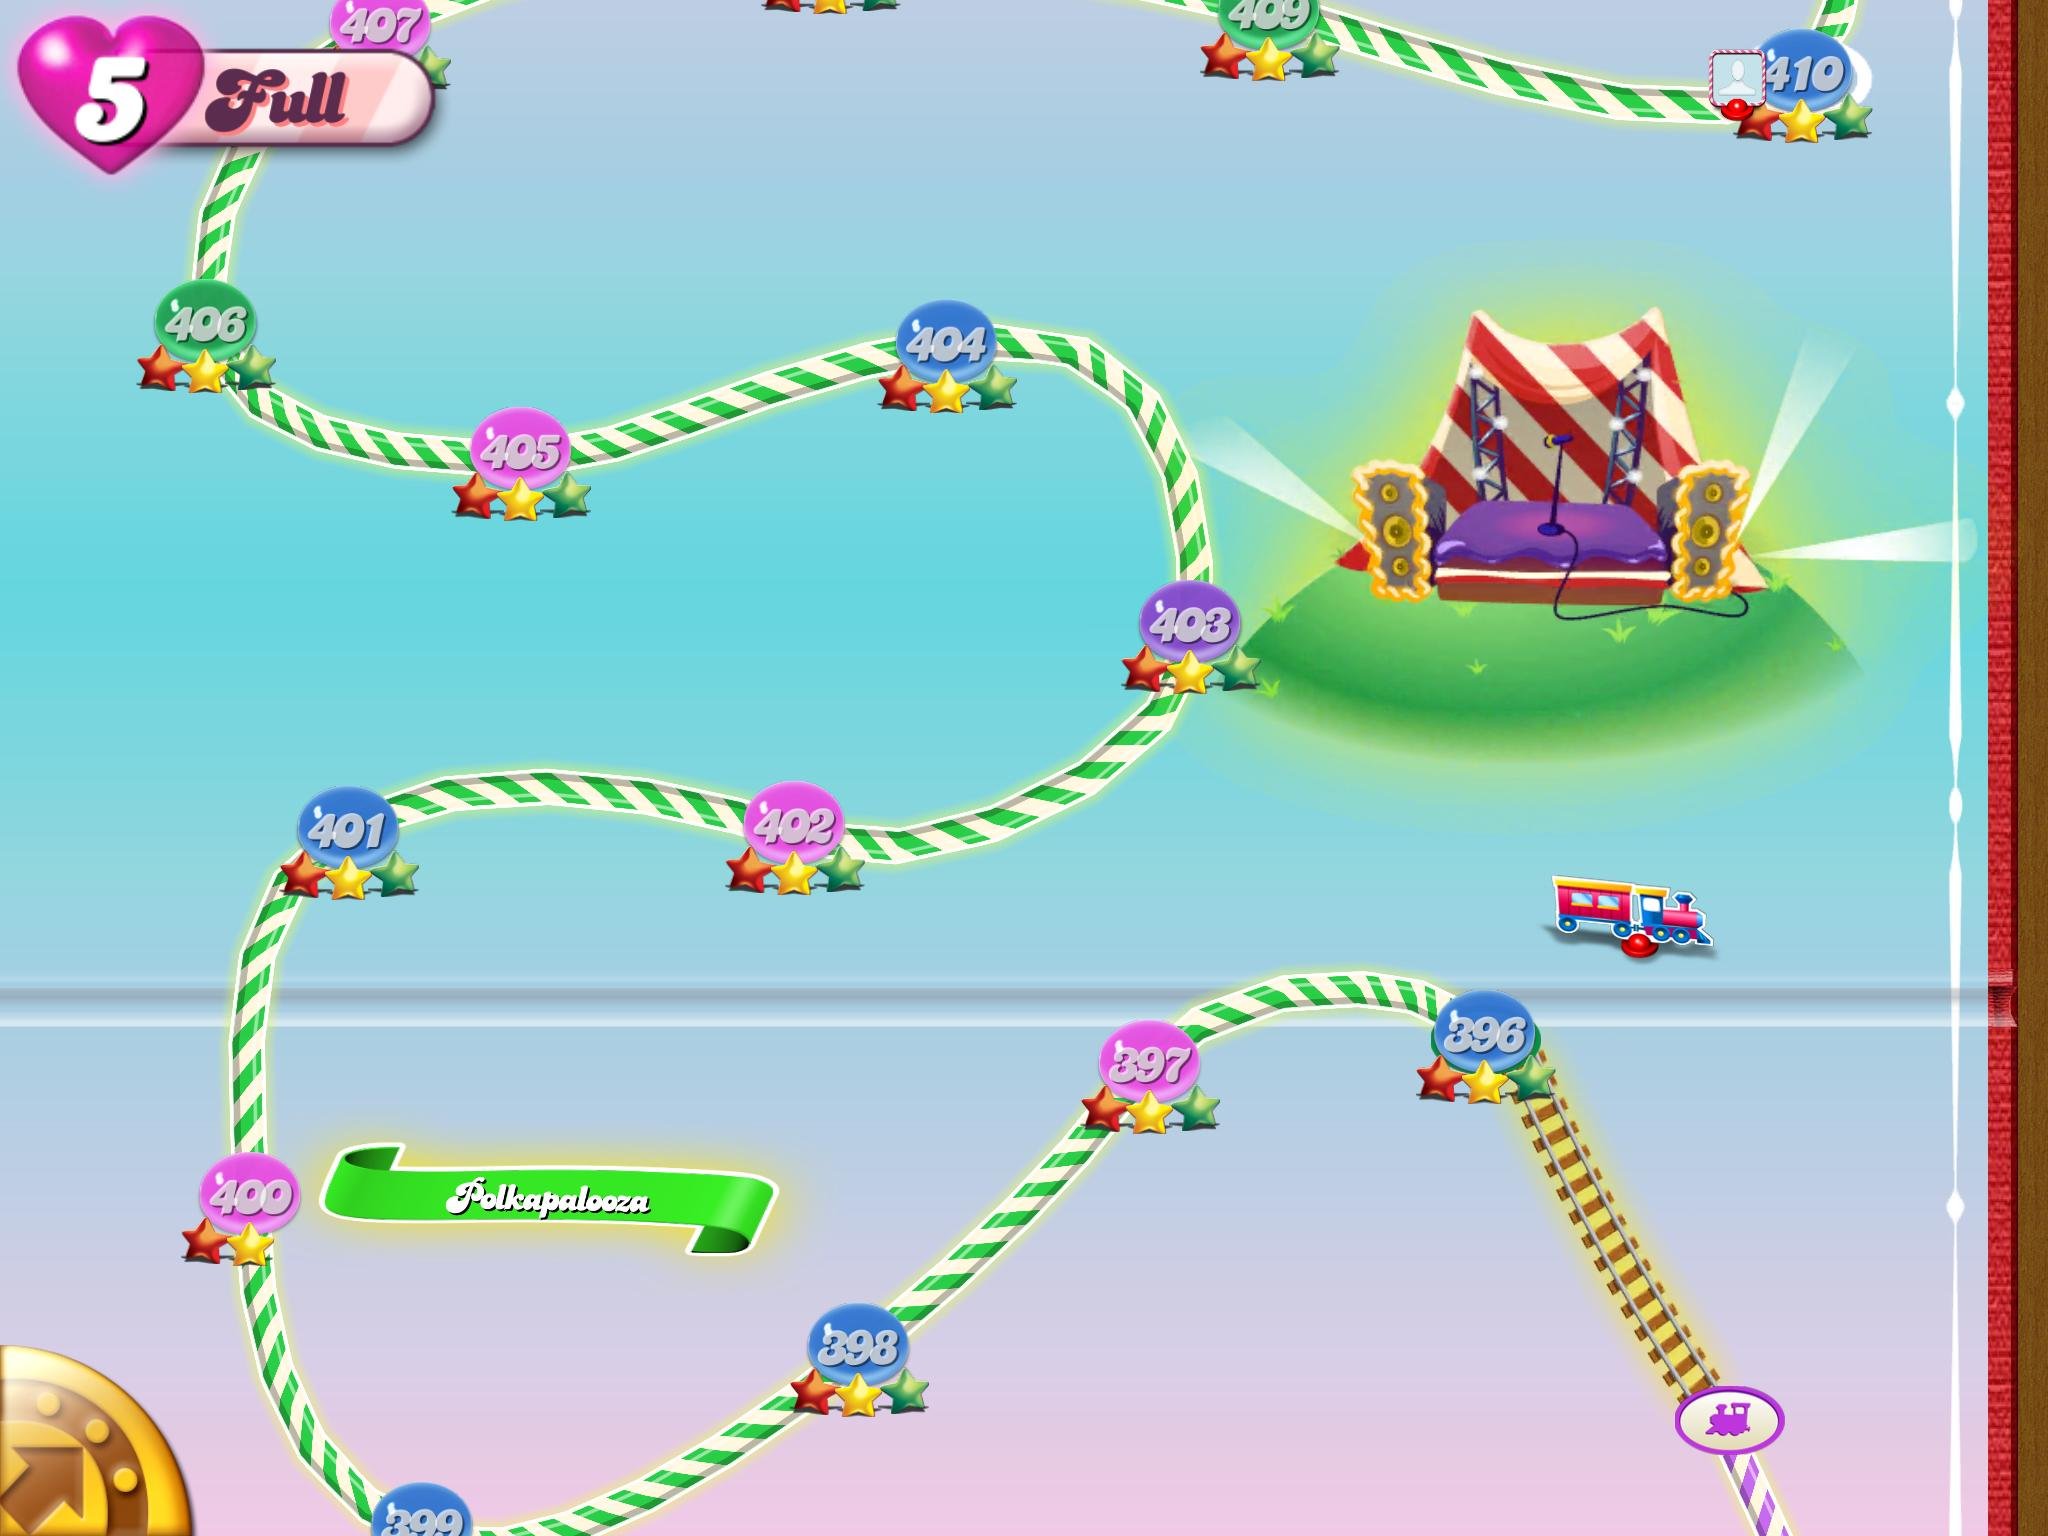 Candy Crush Saga Match Online Puzzle Family Wallpaper Background